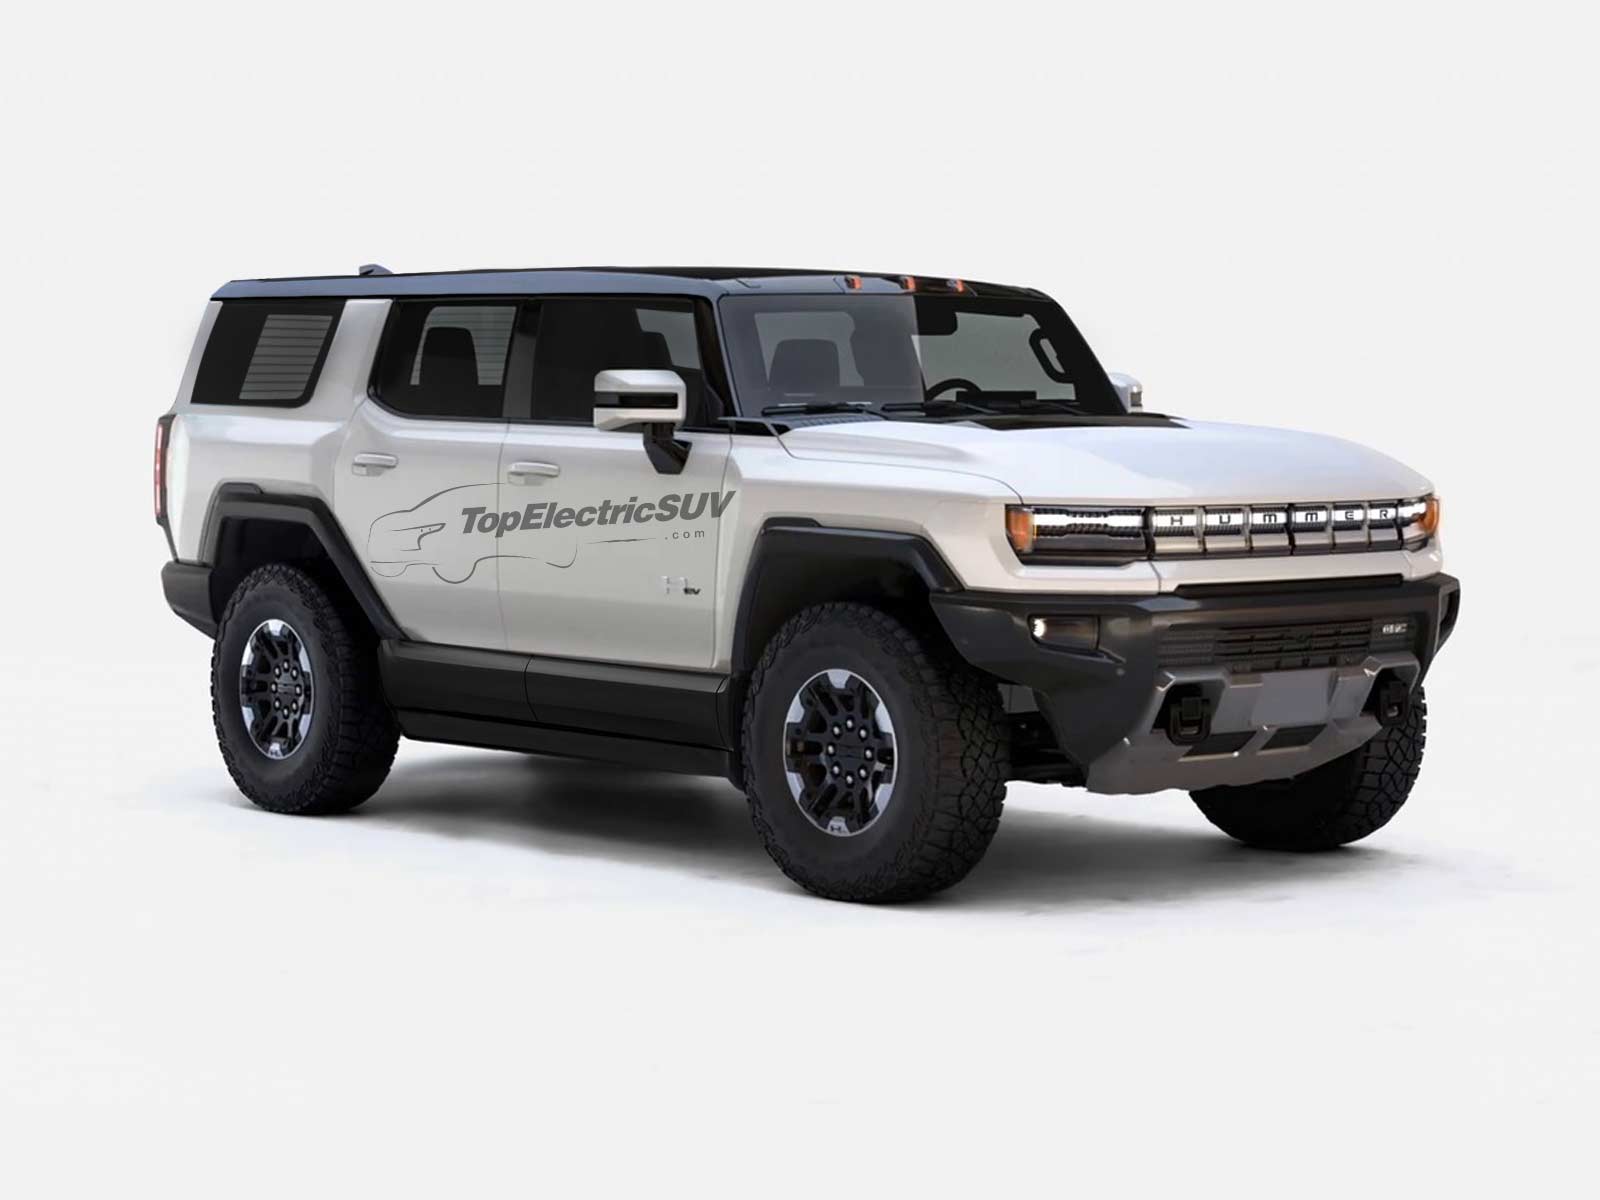 Electric Hummer Suv Could Feature Largest Sunroof For An Suv